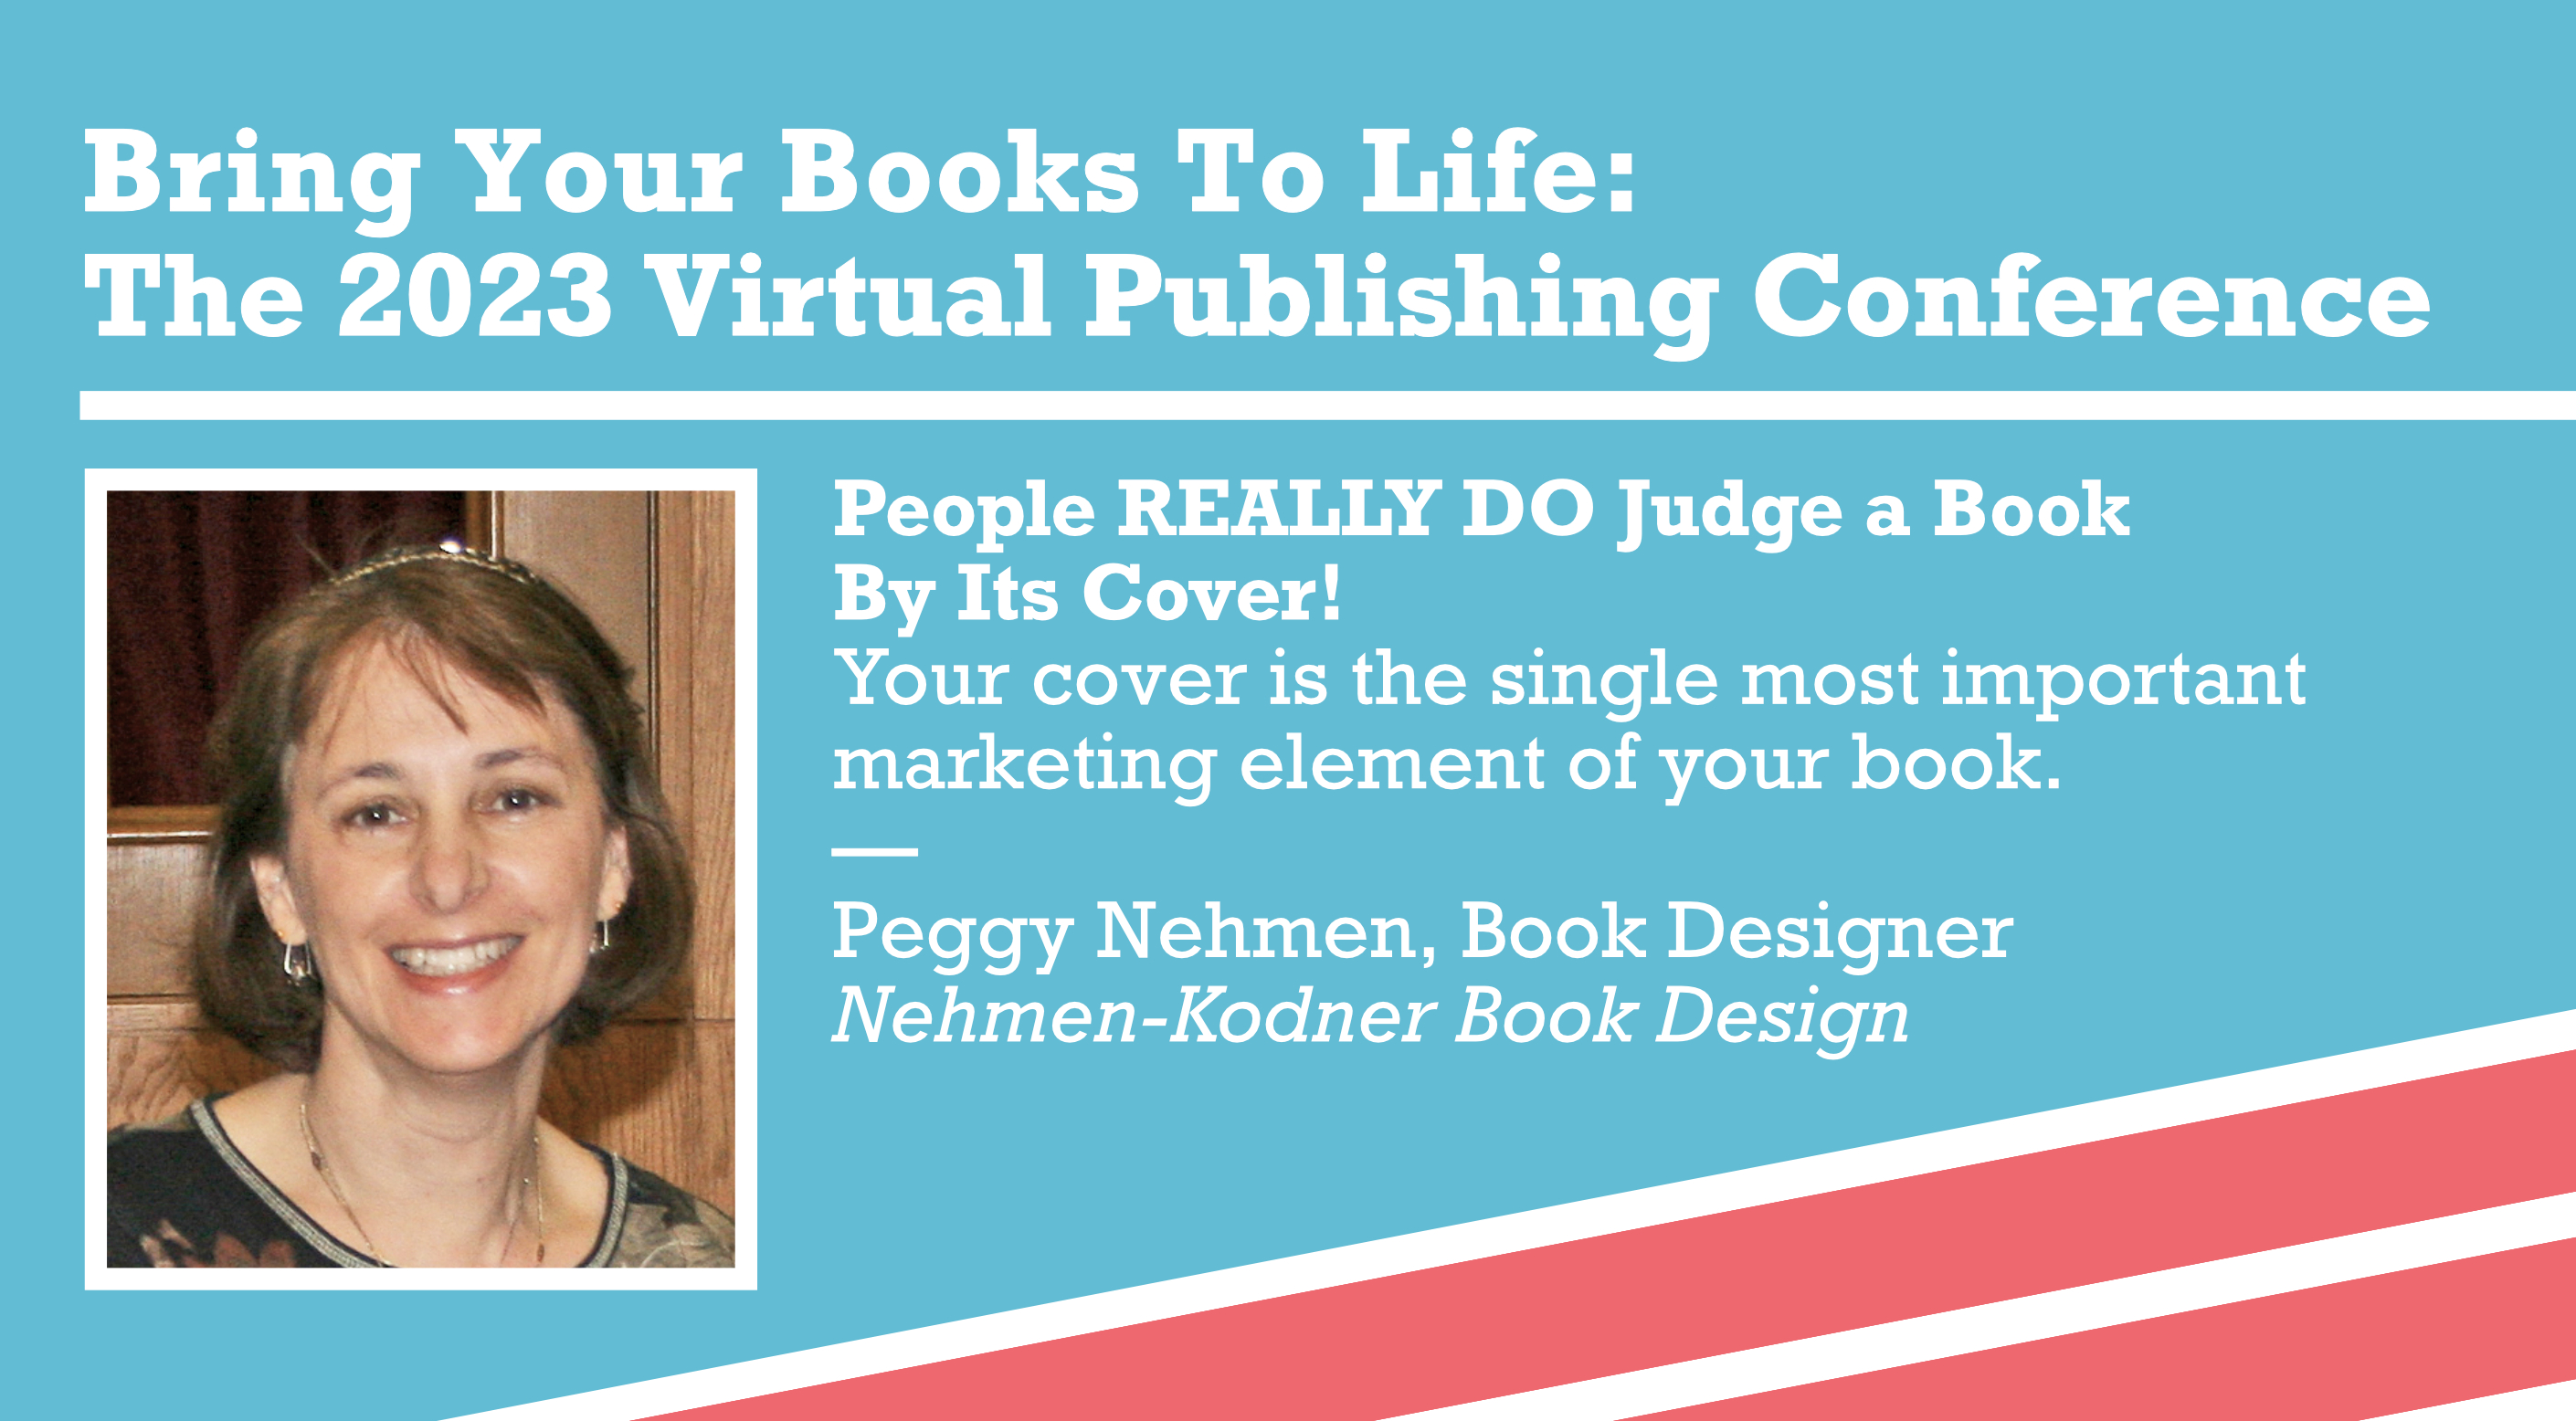 People REALLY DO Judge a Book By Its Cover! Your cover is the single most important marketing element of your book. —Peggy Nehmen, Book Designer, Nehmen-Kodner Book Design 